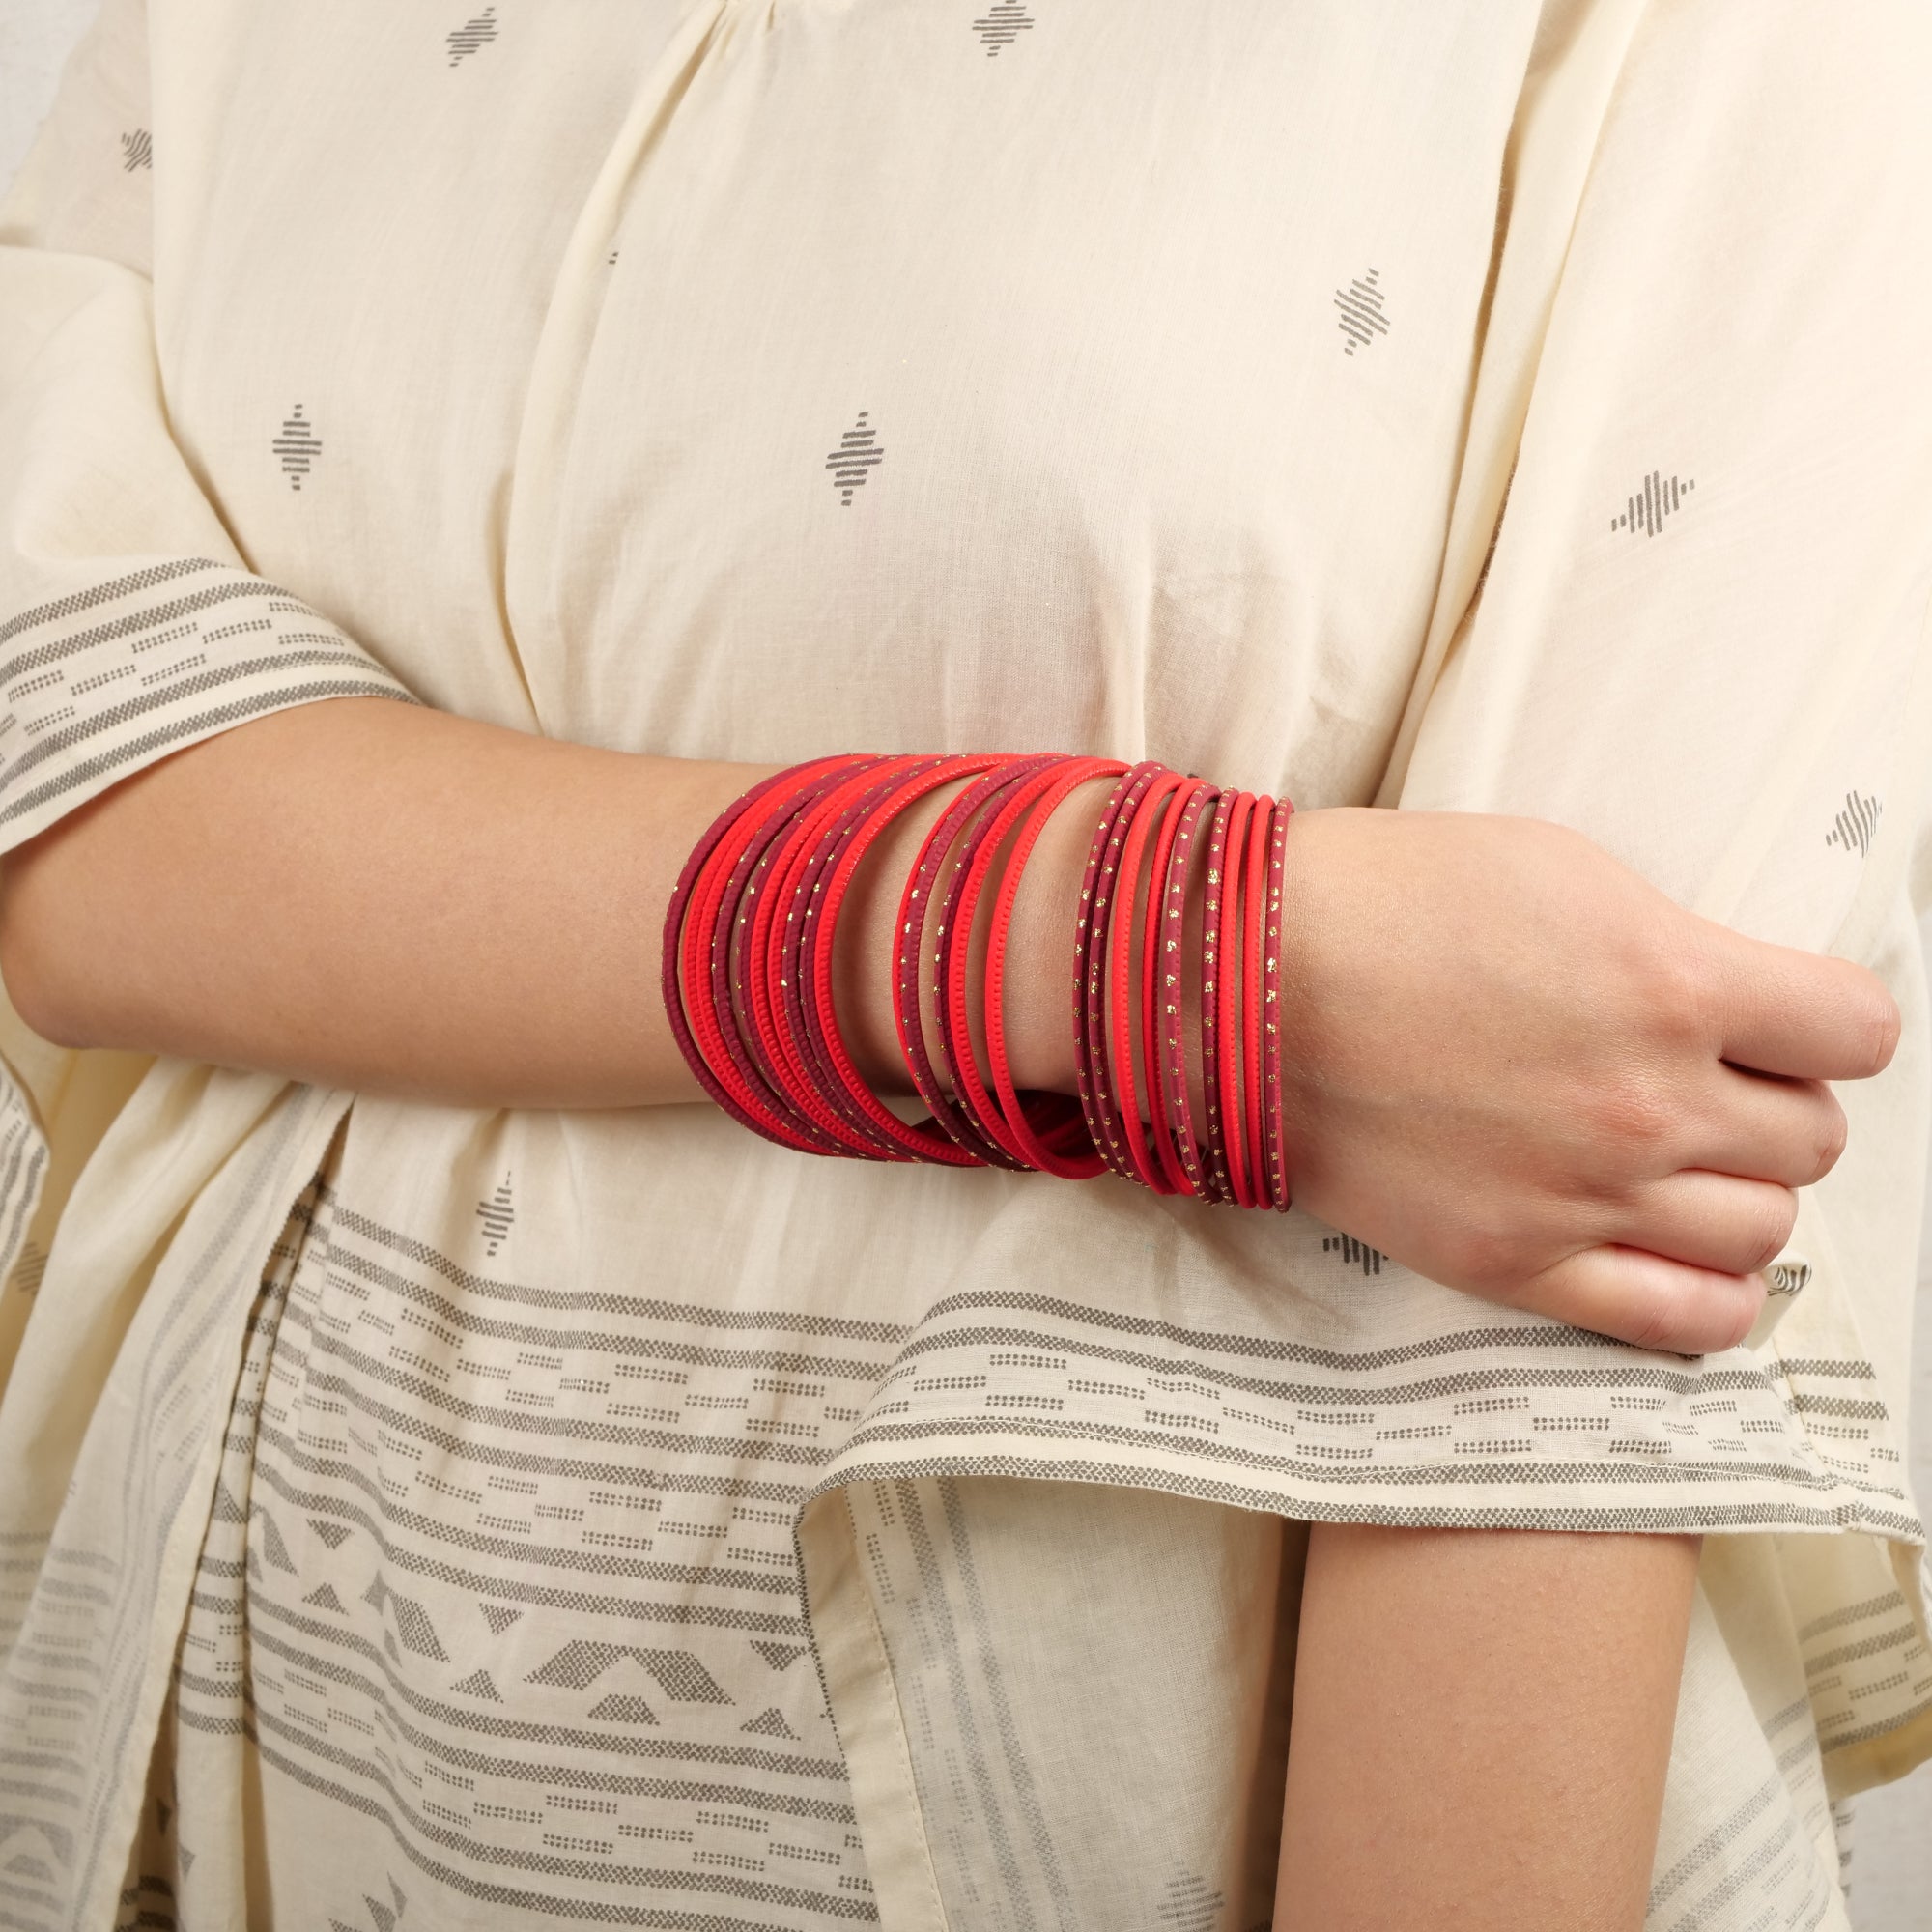 Crimson Red and Maroon Bangle Stack